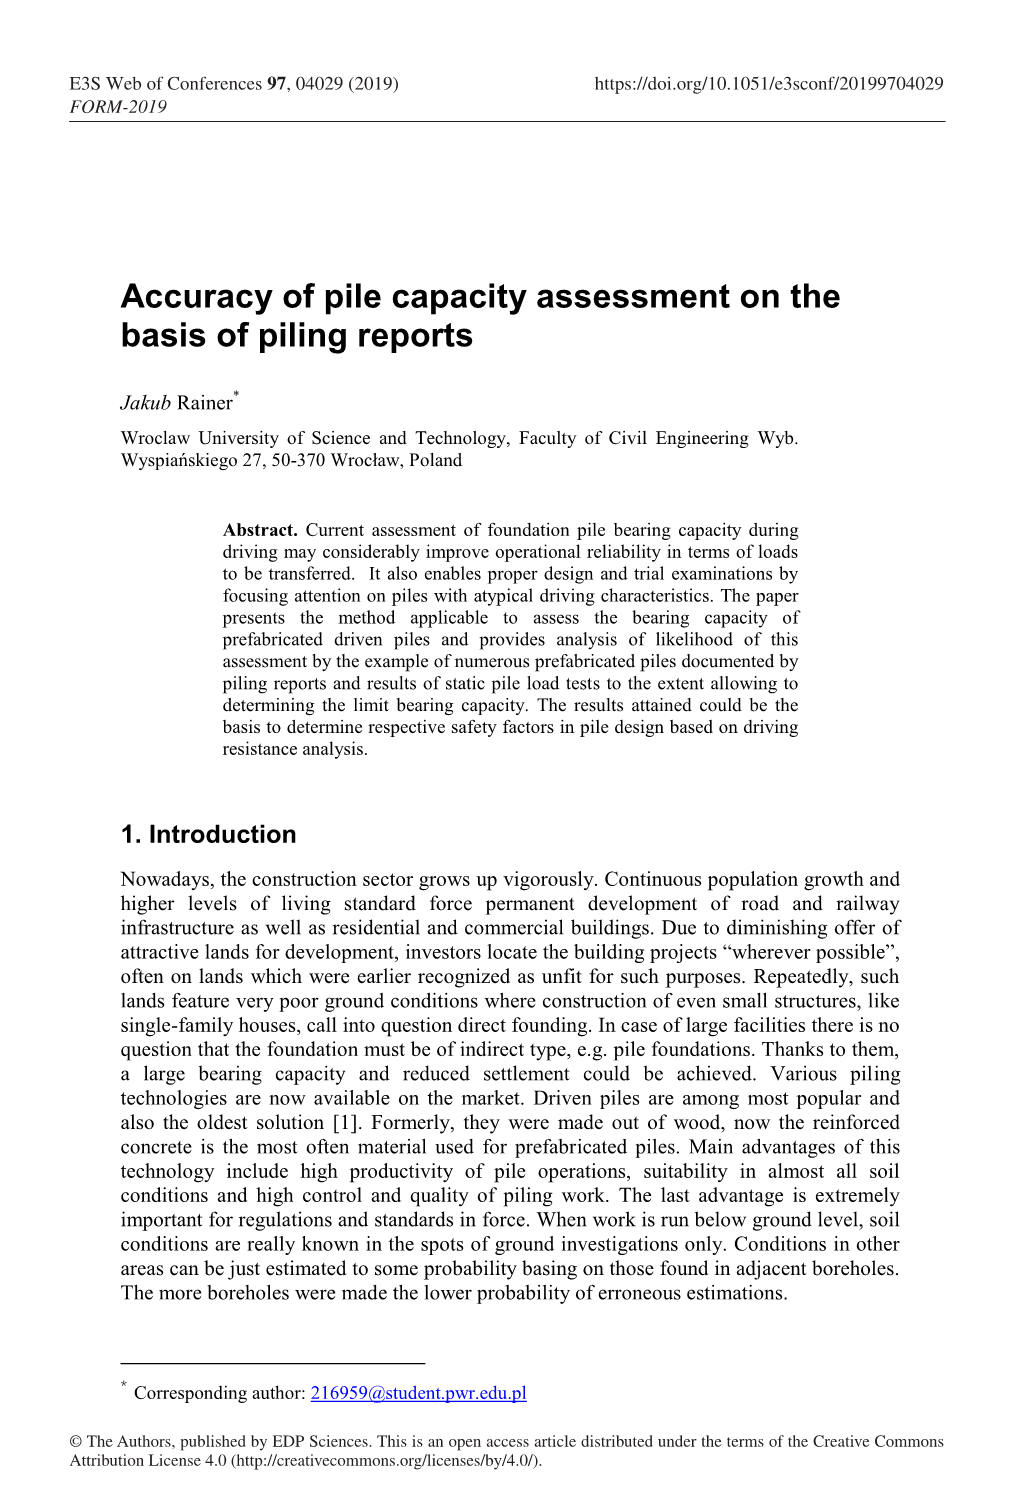 Accuracy of Pile Capacity Assessment on the Basis of Piling Reports